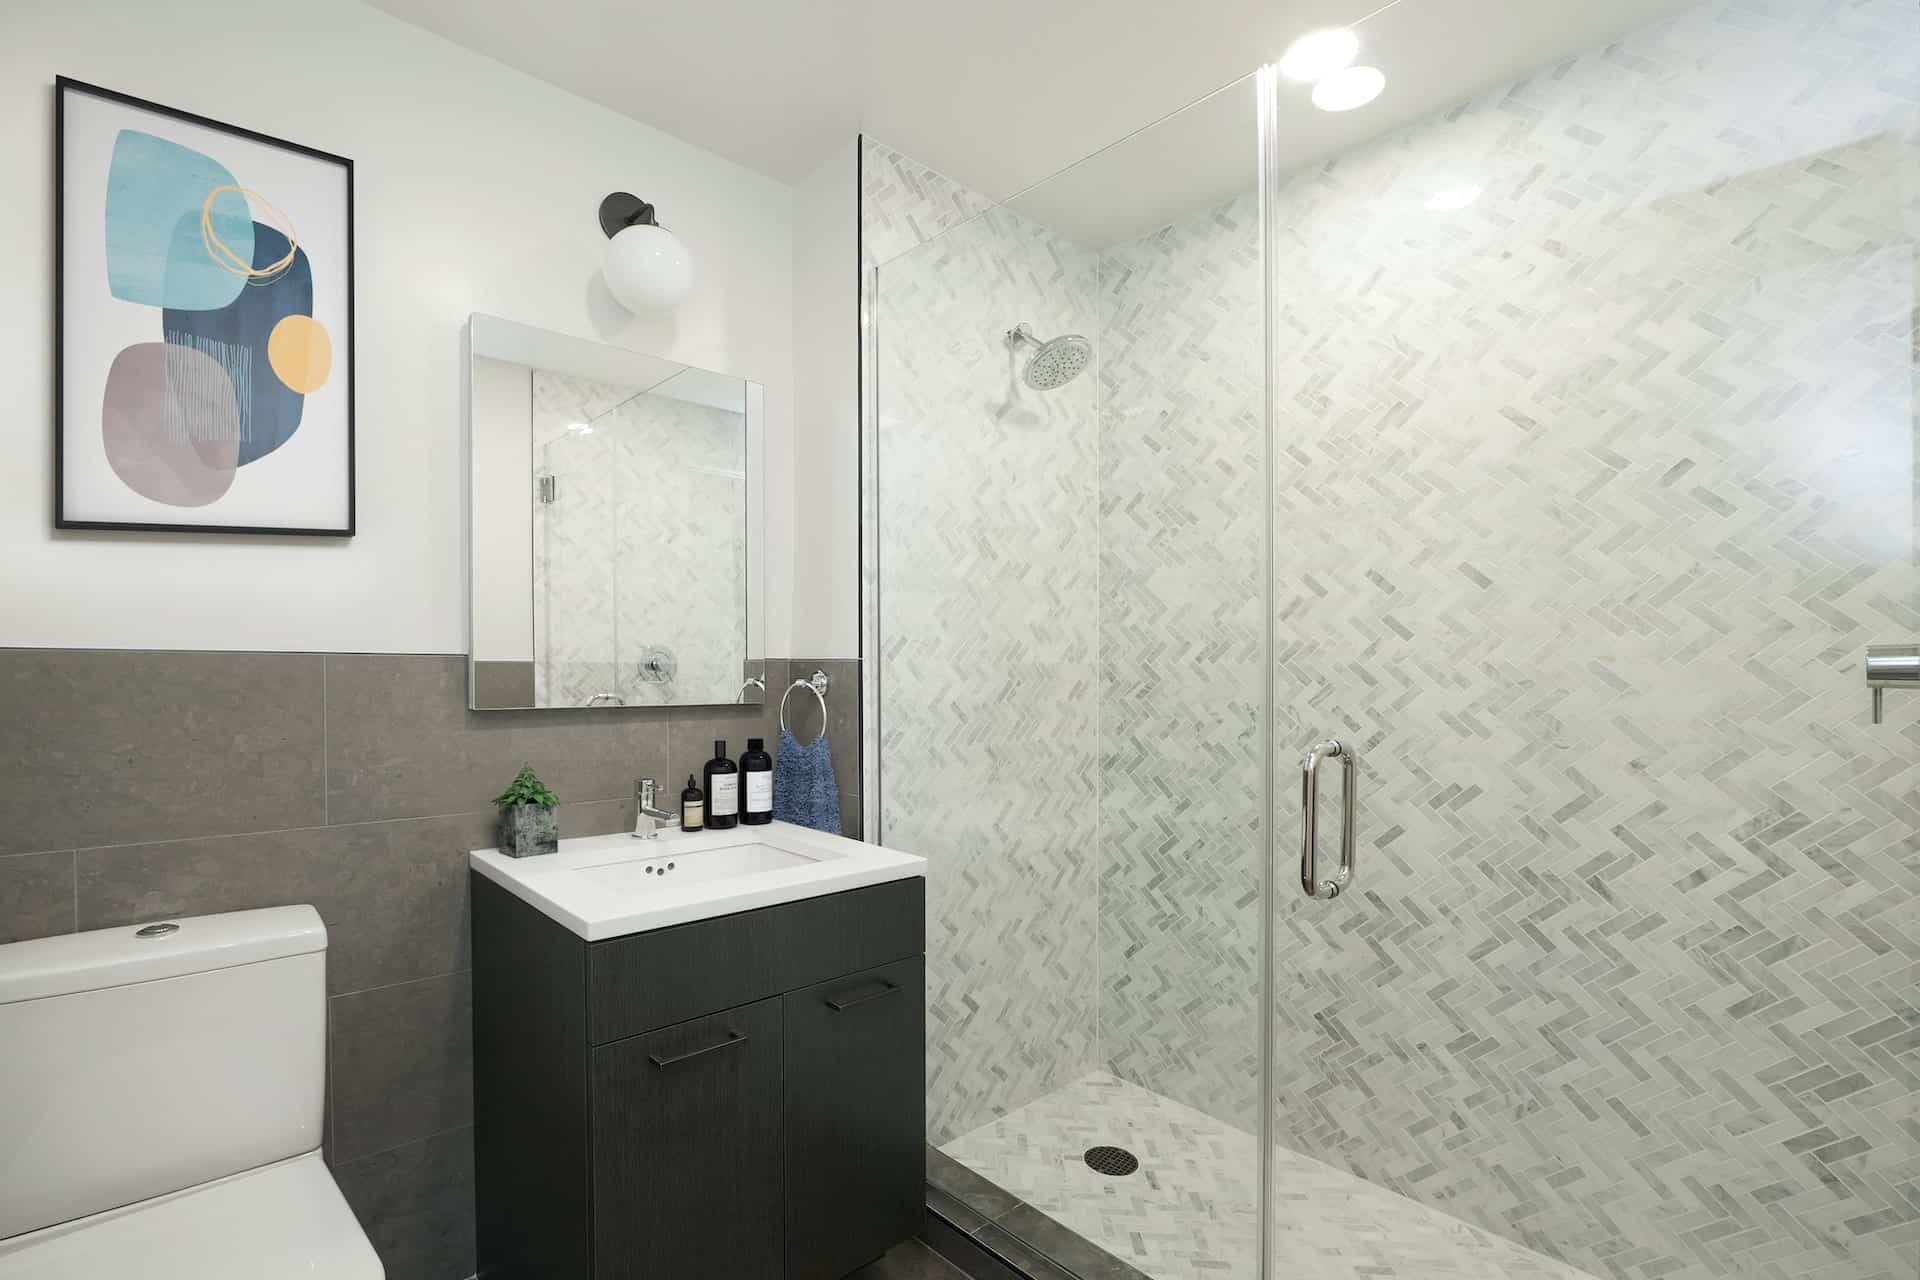 Bathroom at 101 East 10th Street with single vanity, square mirror, and a standing shower with herringbone tile pattern.